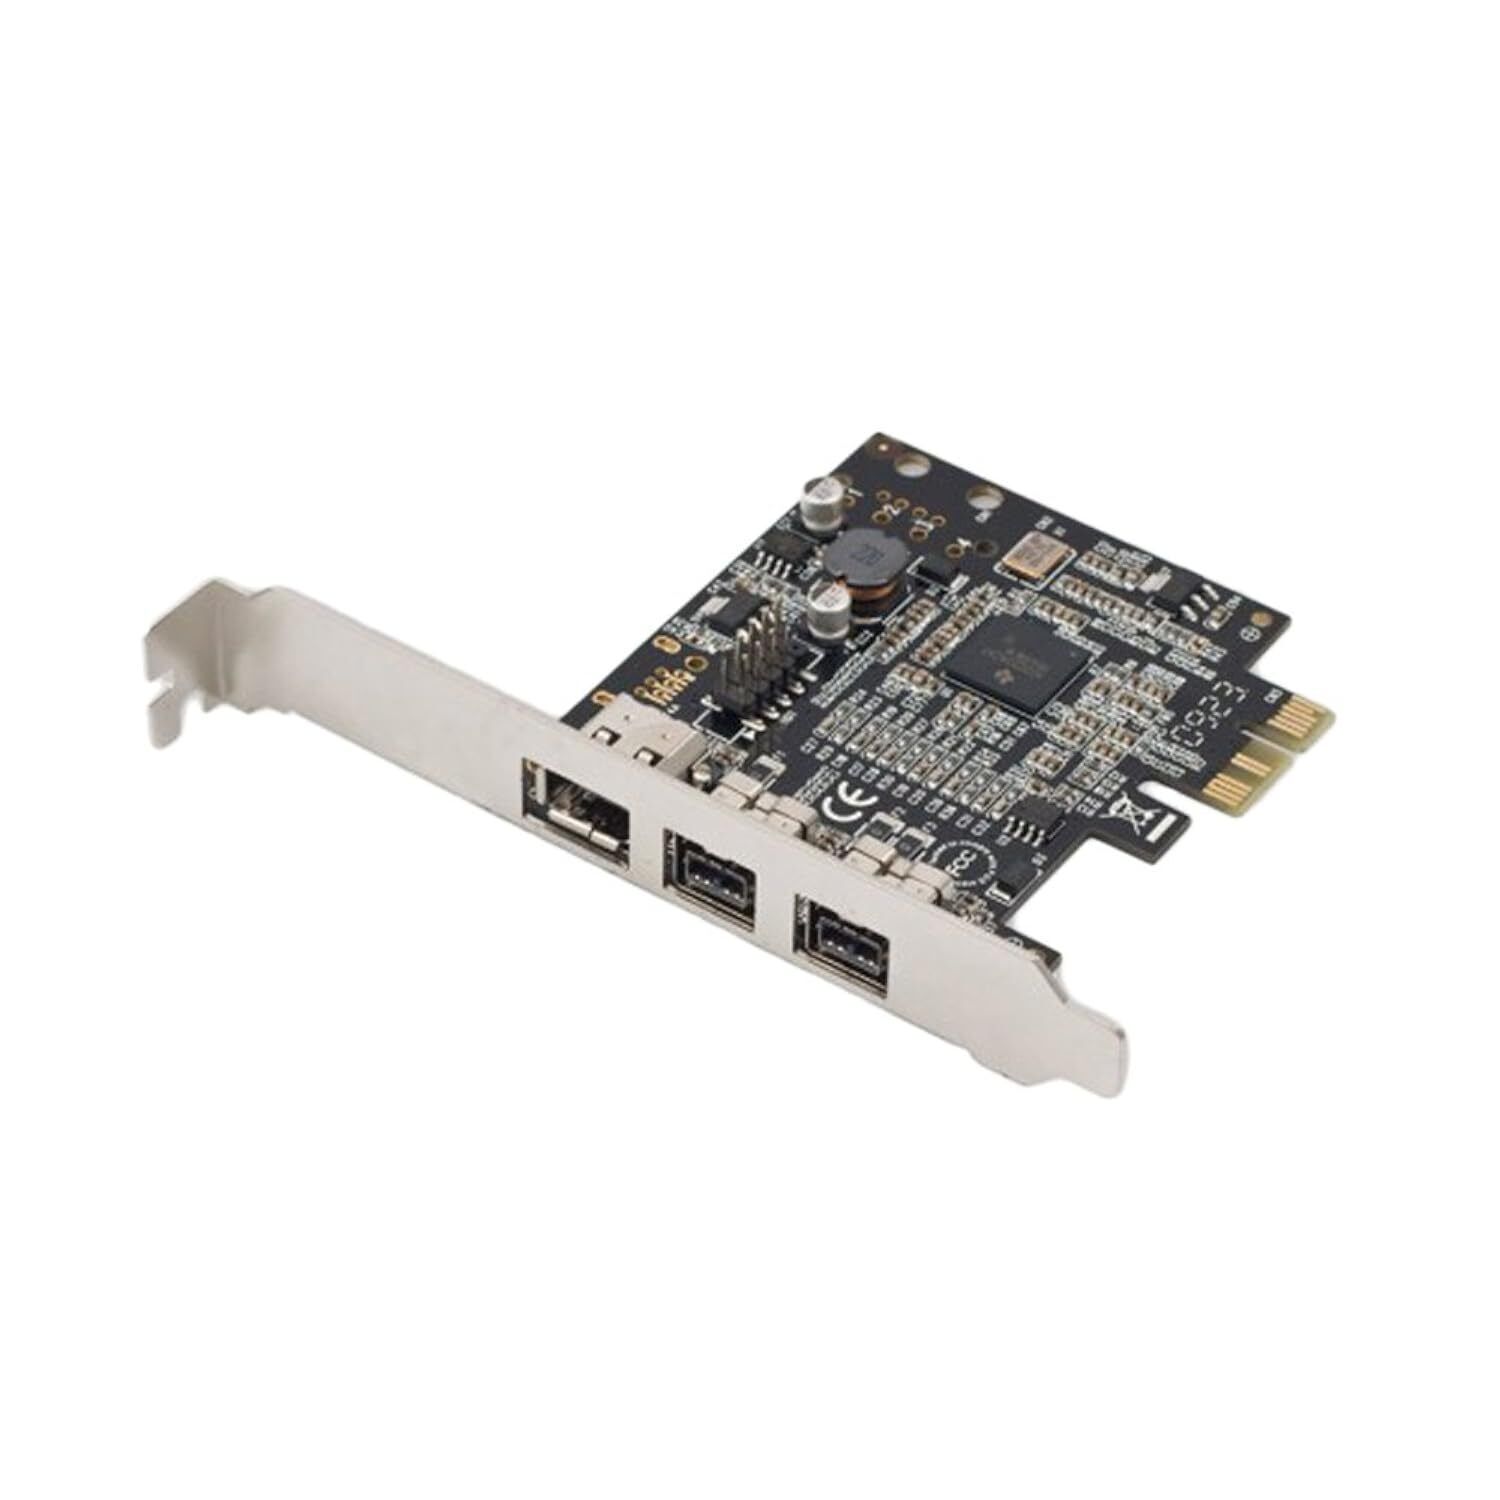 Syba Low Profile PCI-Express Firewire Card with Two 1394b Ports and One 1394a